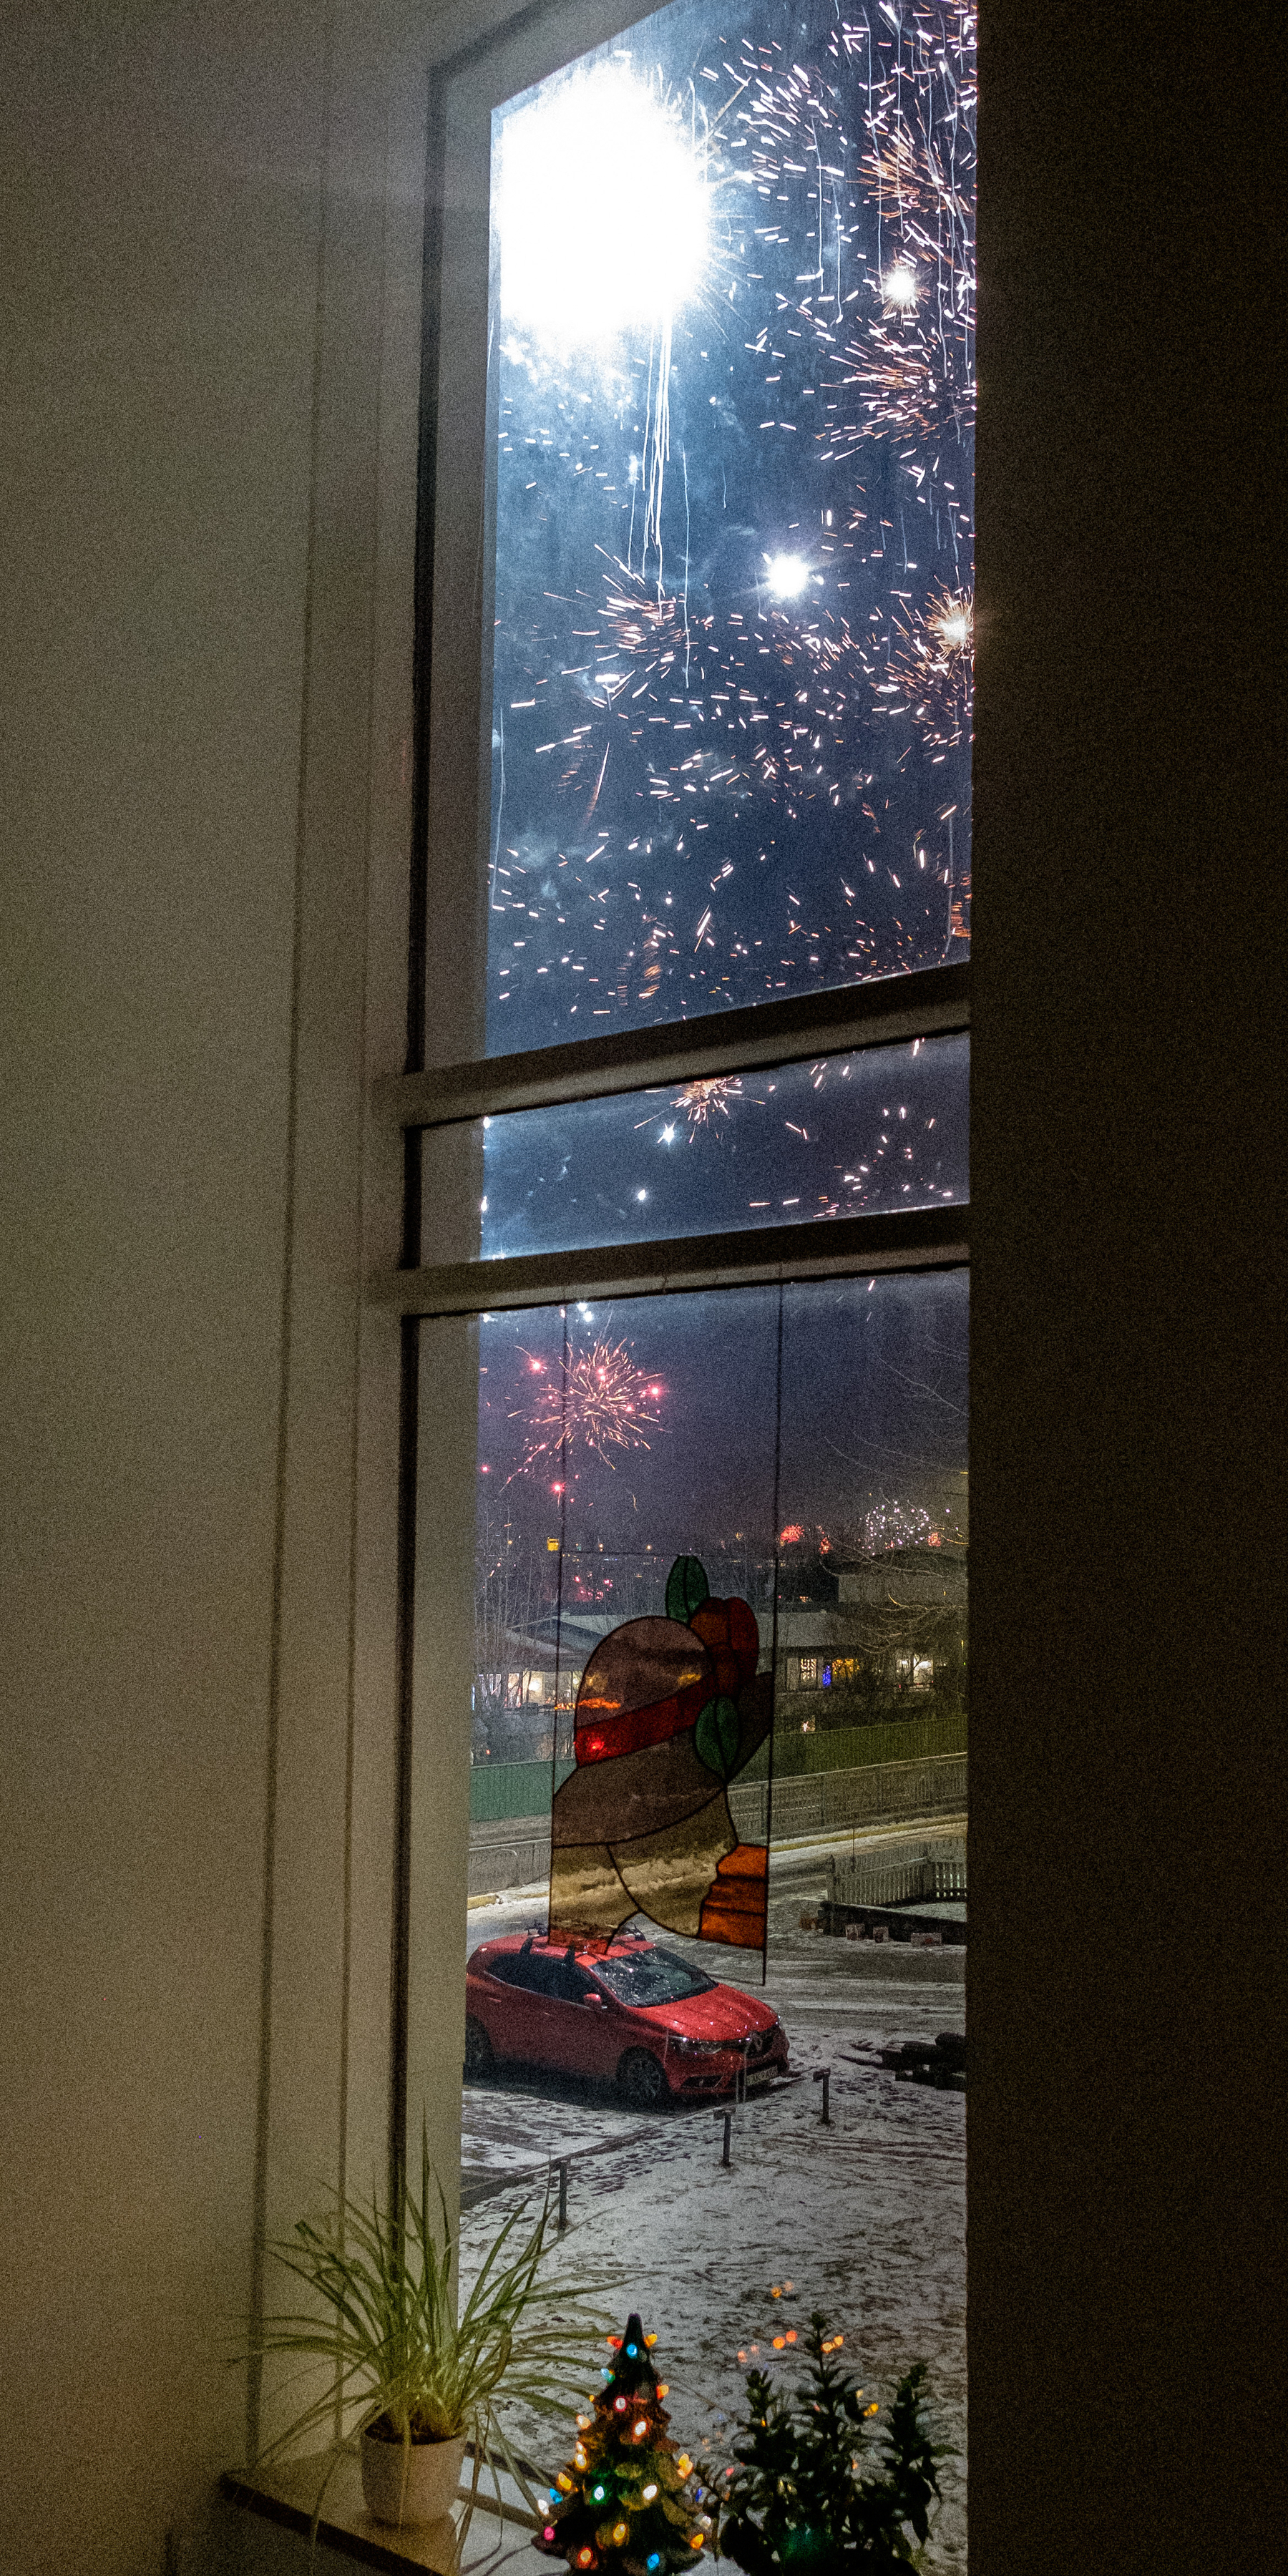 We can see fireworks through a tall window.